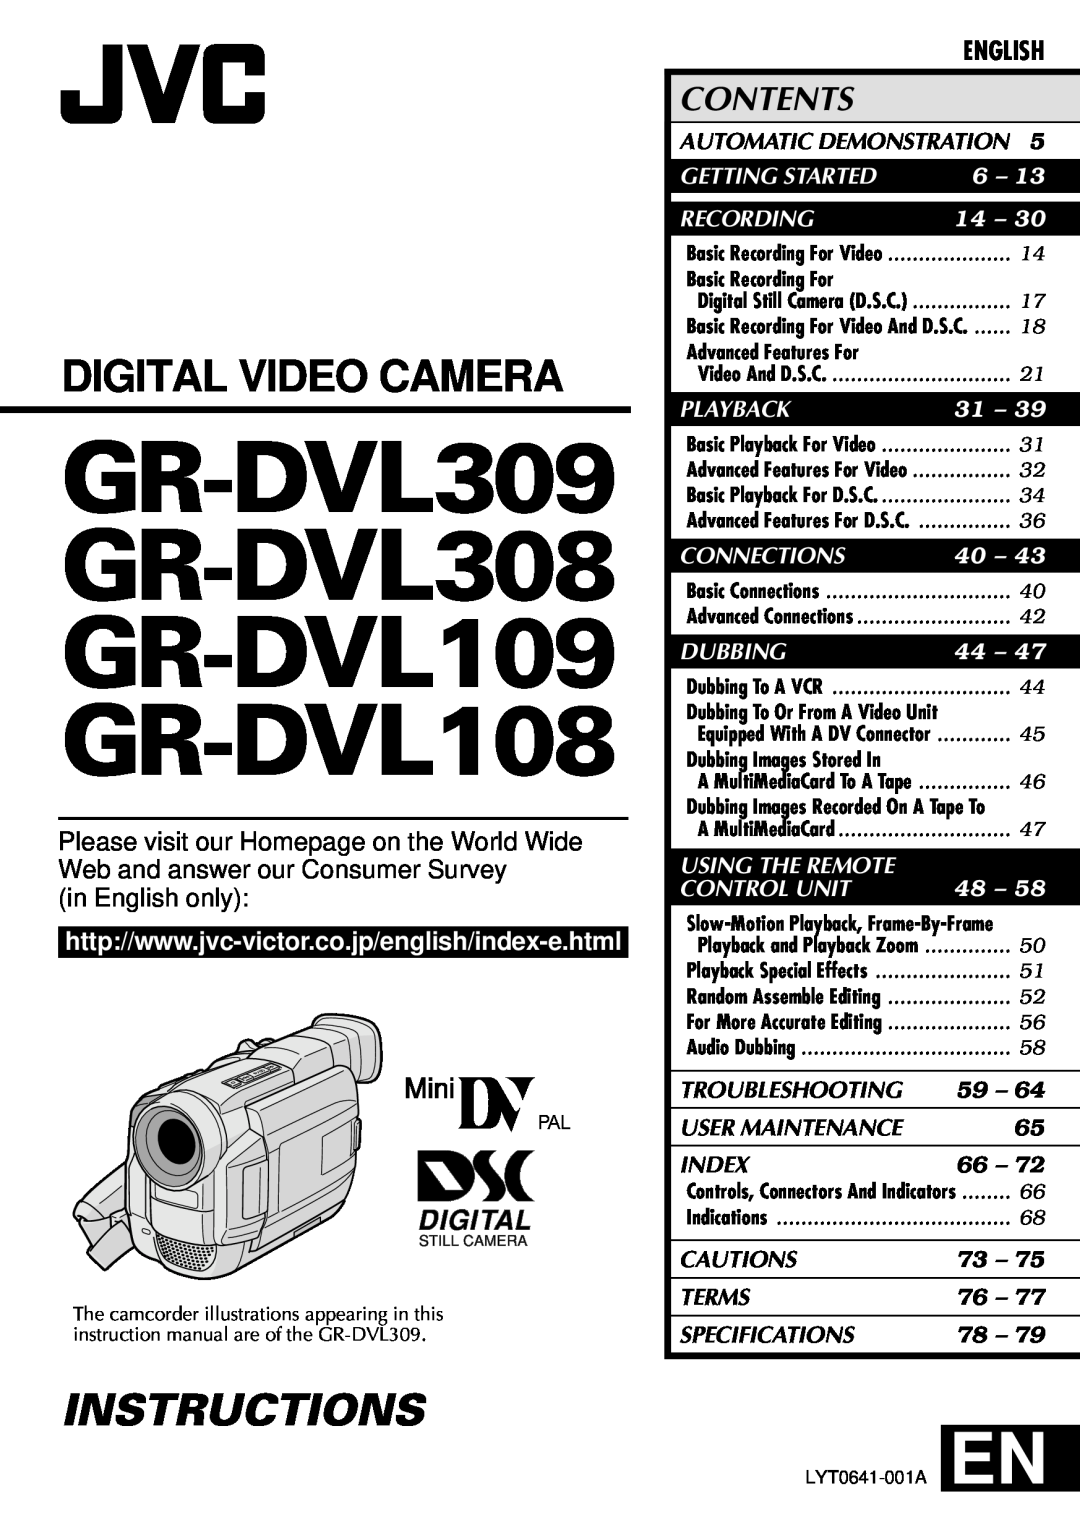 JVC GR-DVL309 specifications in English only, Troubleshooting, User Maintenance, Index, Cautions, Terms, Specifications 